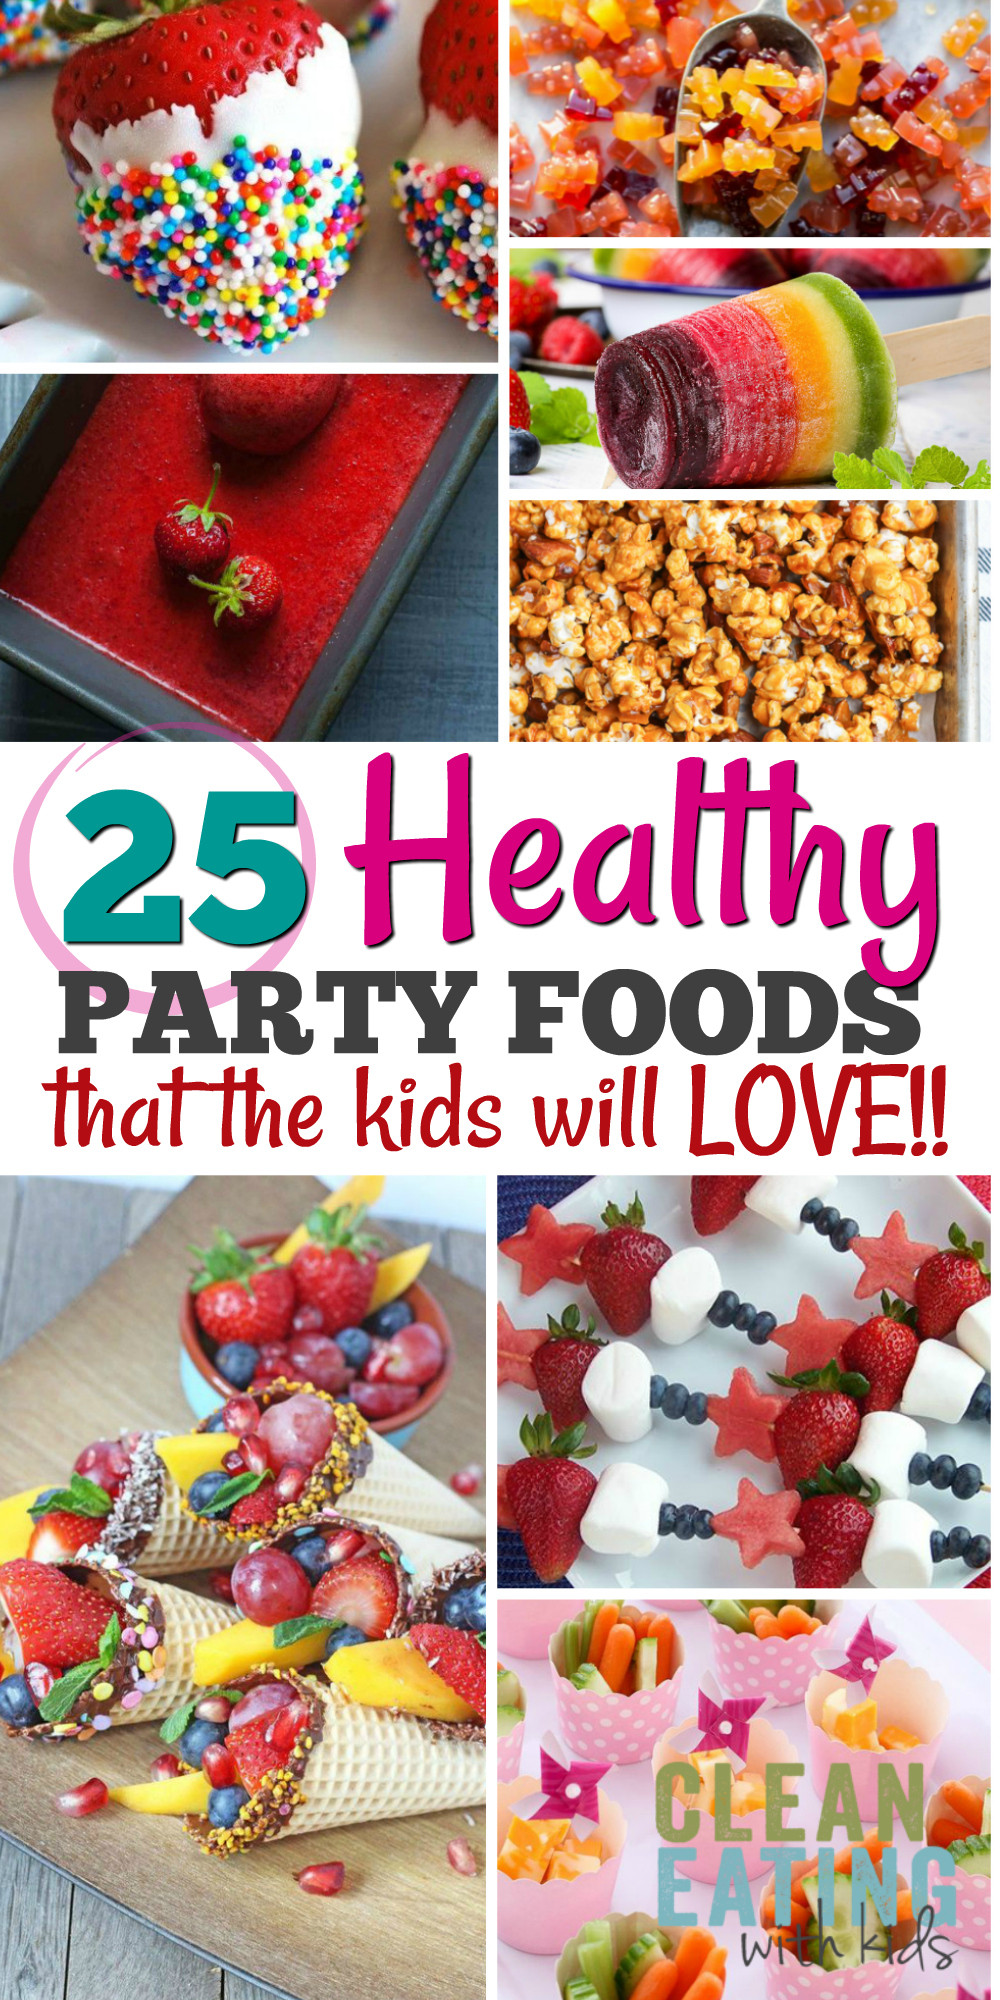 Kids Birthday Party Snacks
 25 Healthy Birthday Party Food Ideas Clean Eating with kids